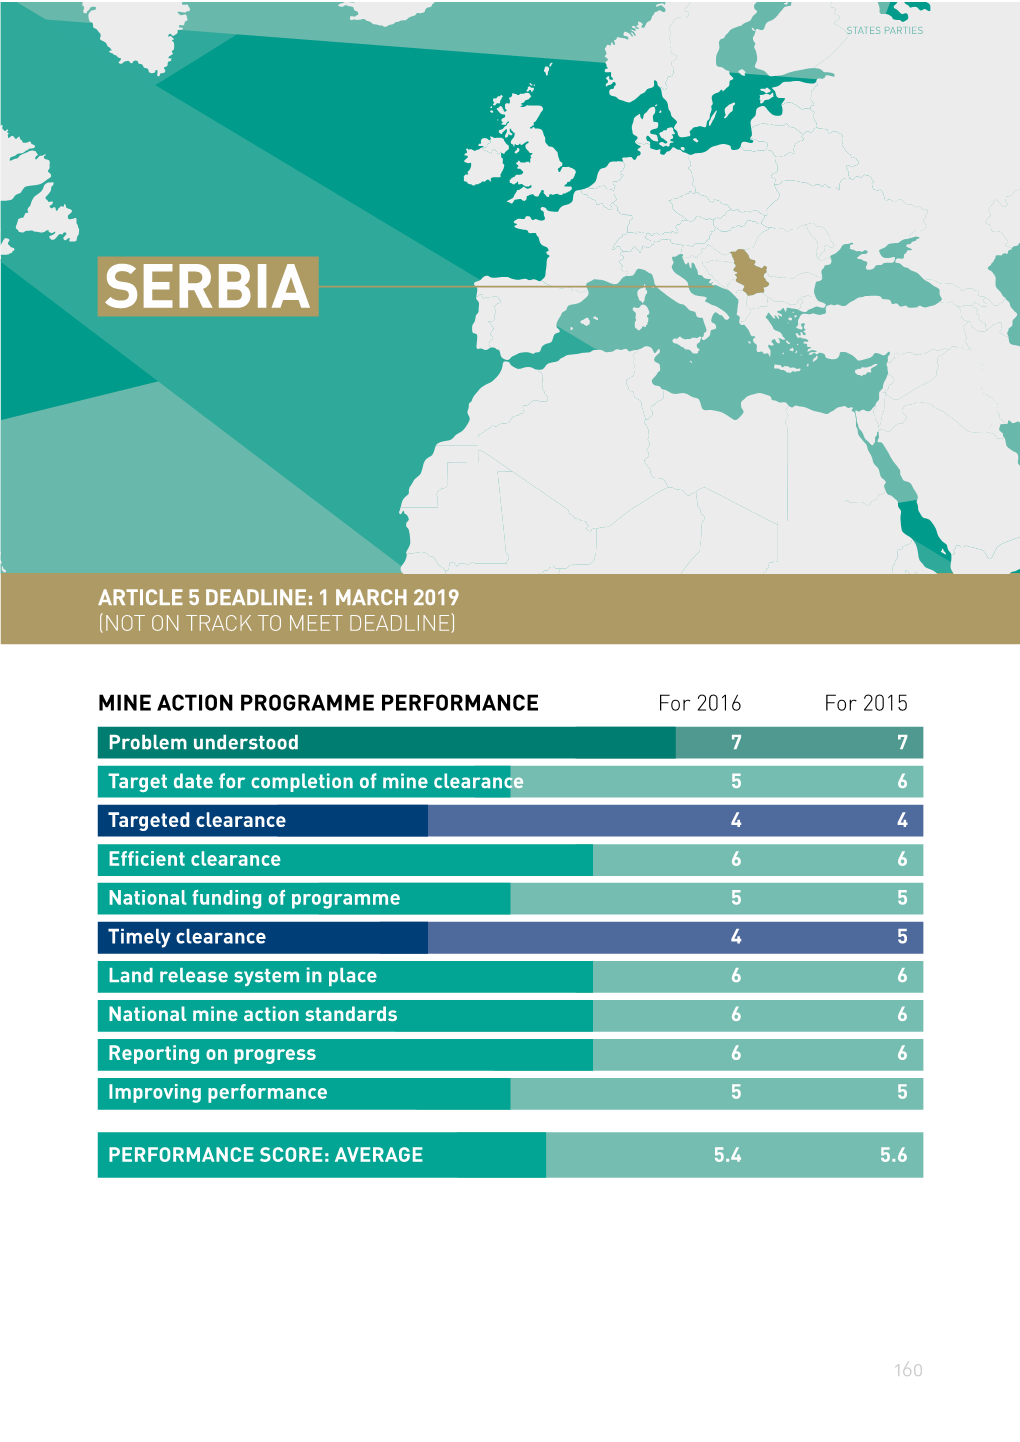 Download the "Clearing the Mines 2017" Report for Serbia